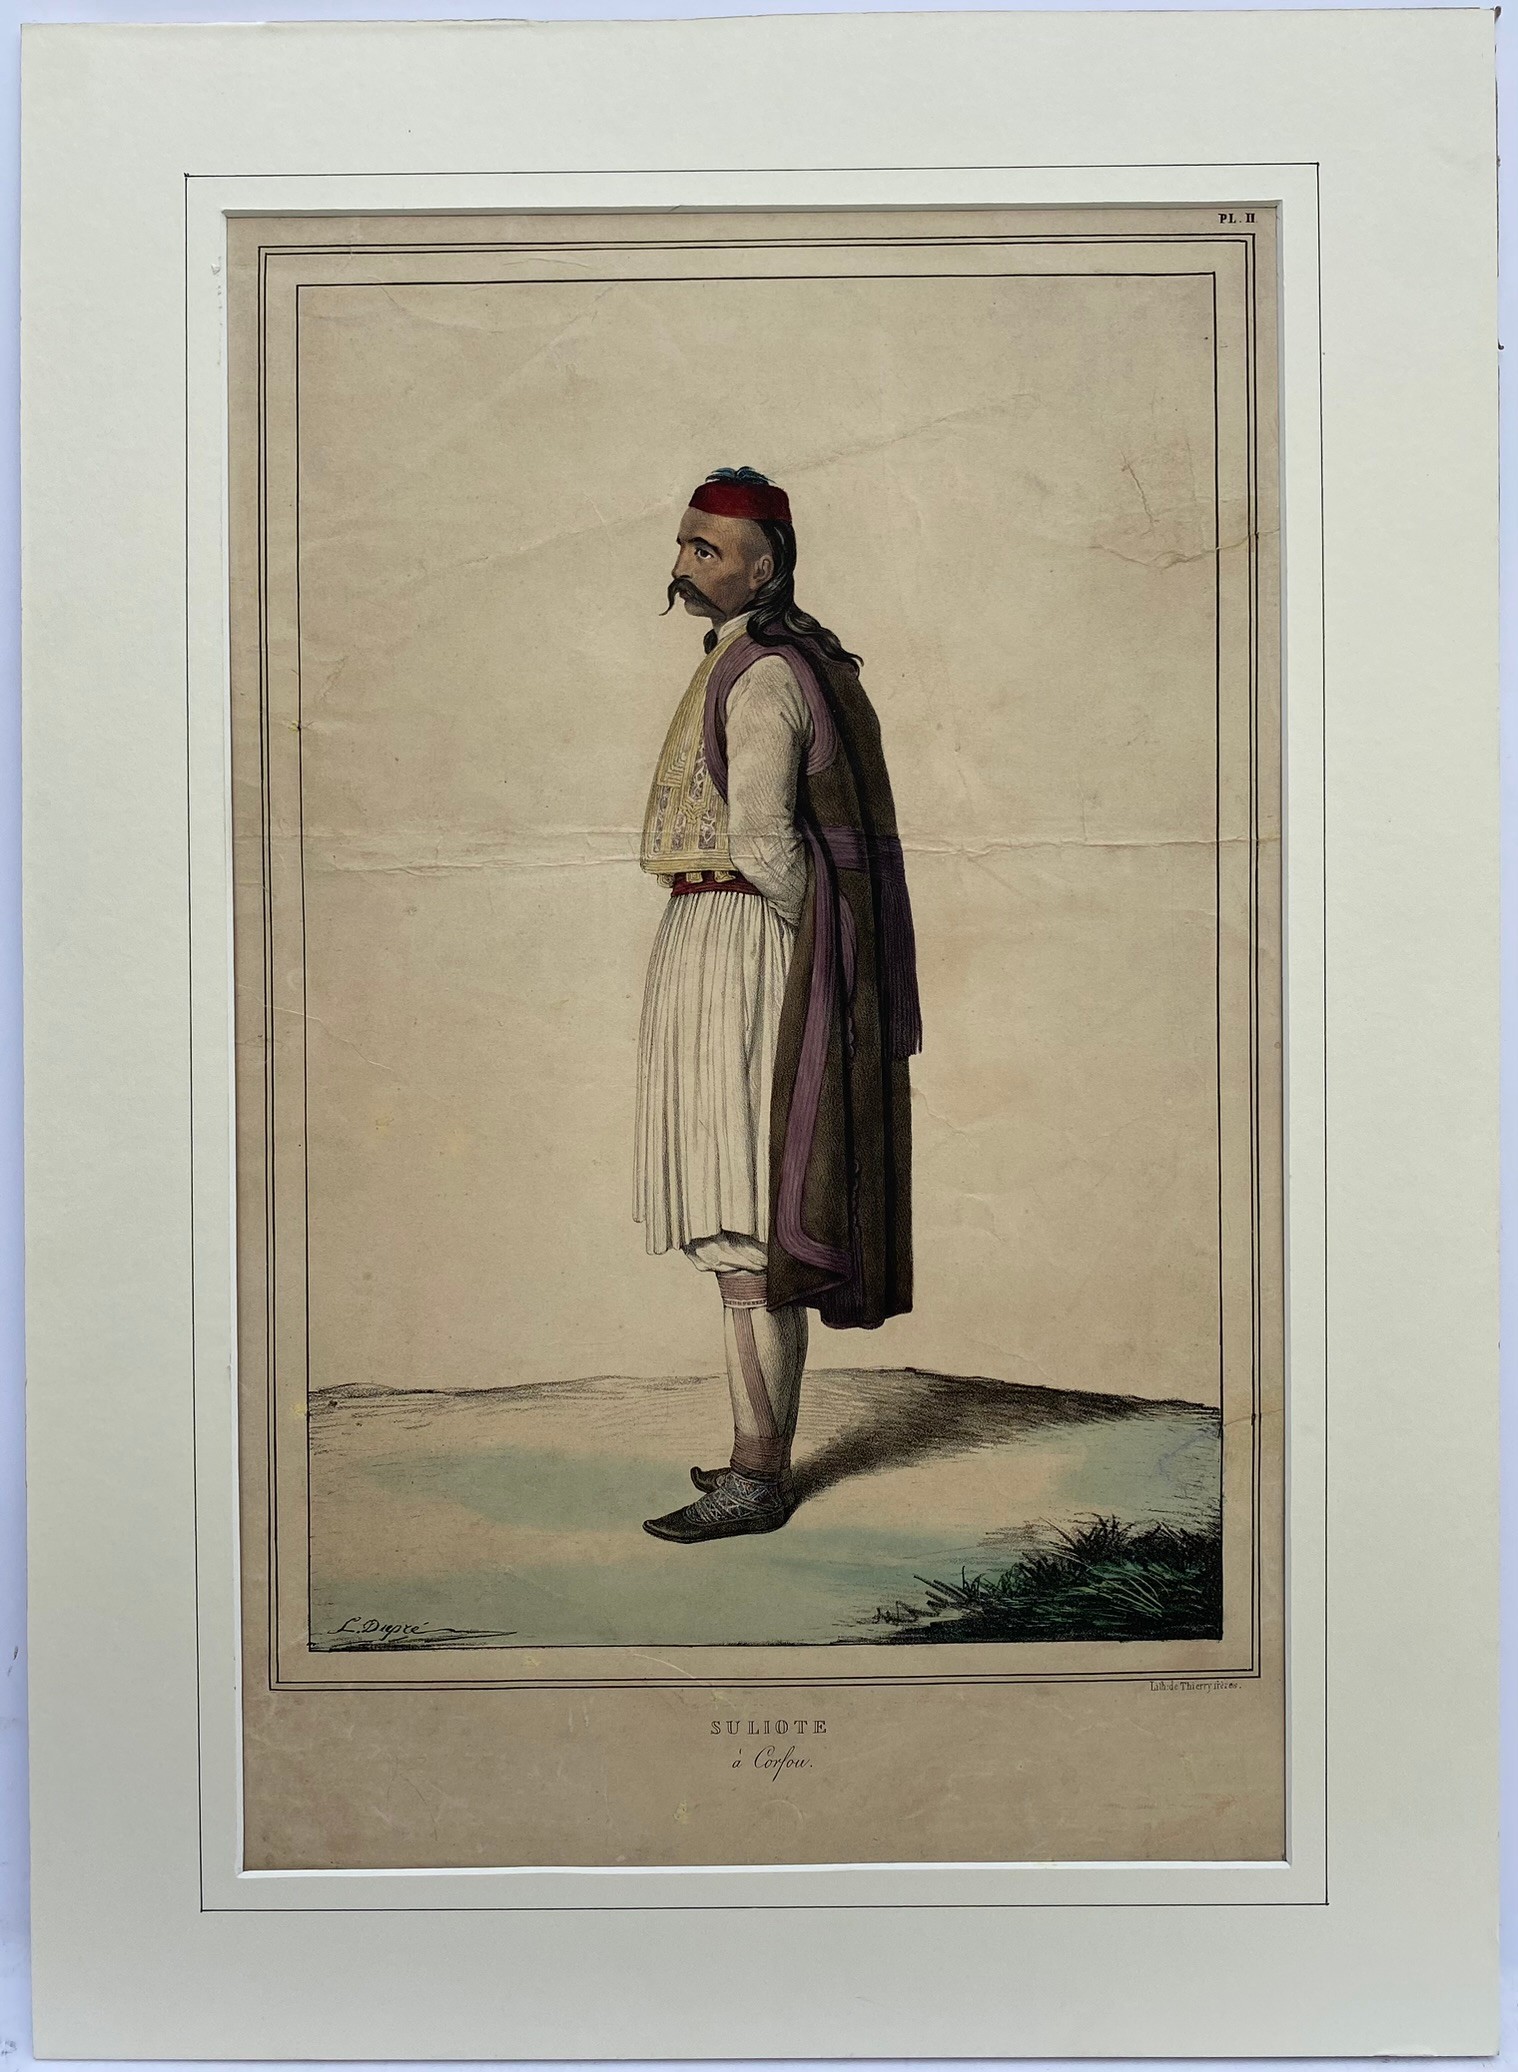 Louis Dupre (1789-1837), Original lithograph hand coloured with watercolour, Titled Suliote a Corfou